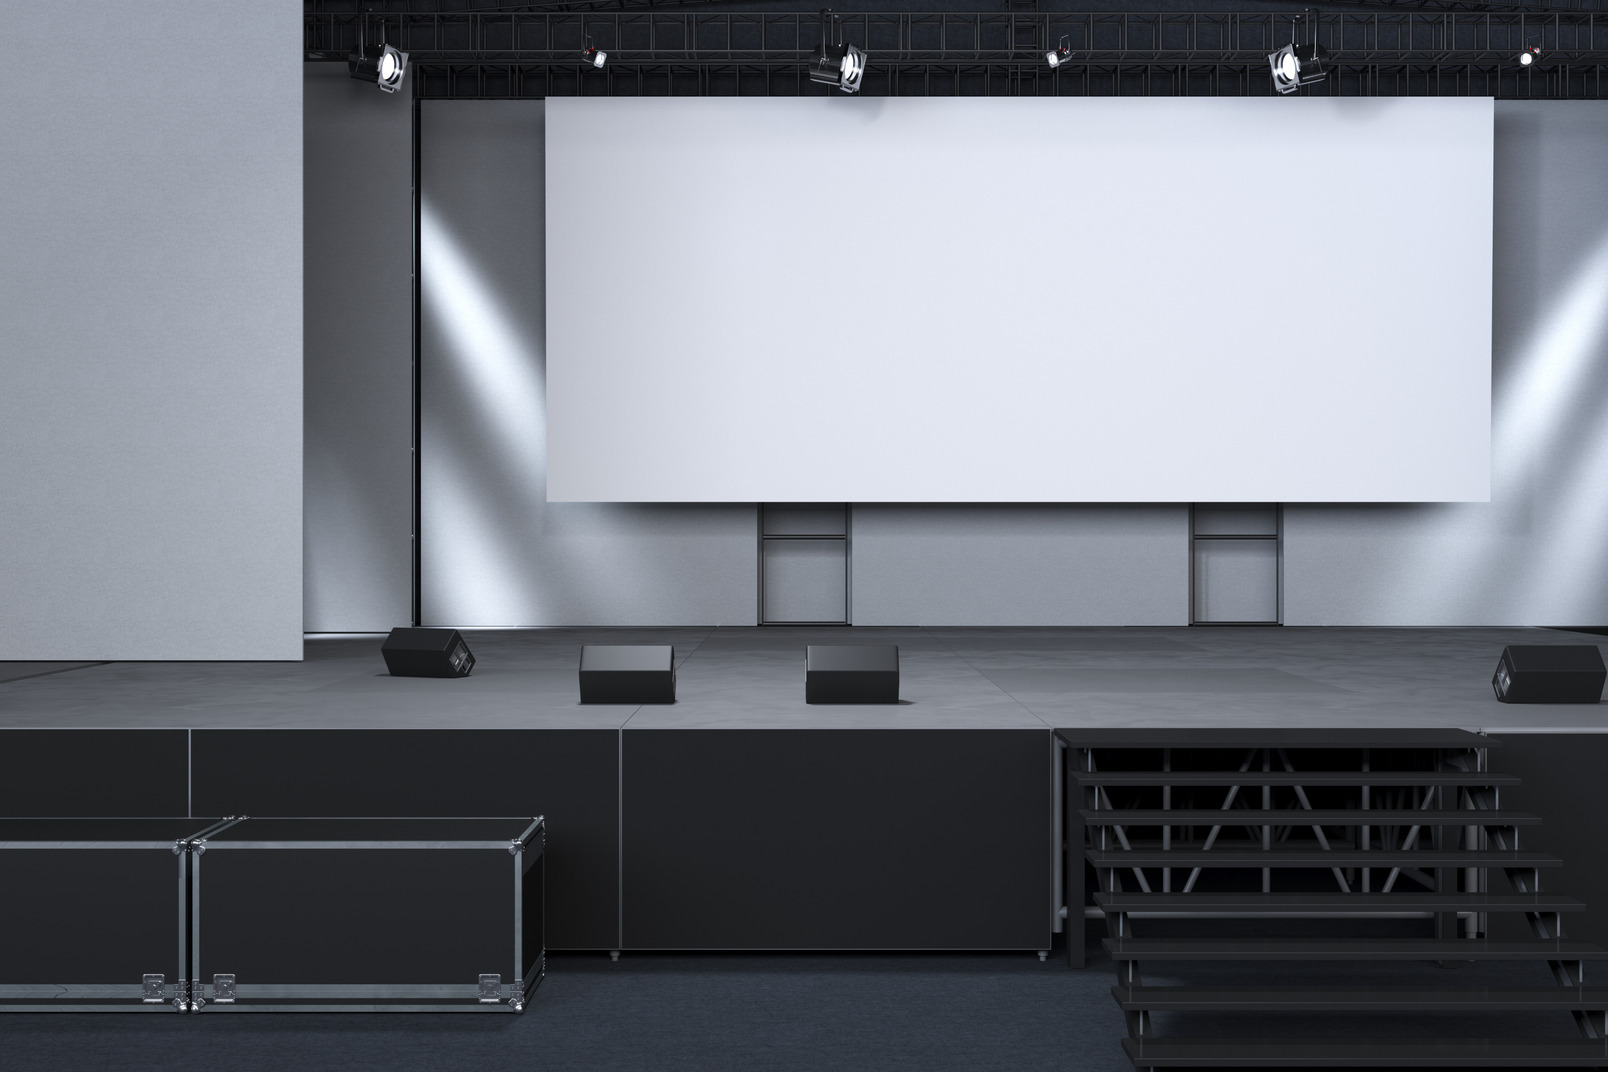 A stage with a big blank screen in an official-looking room